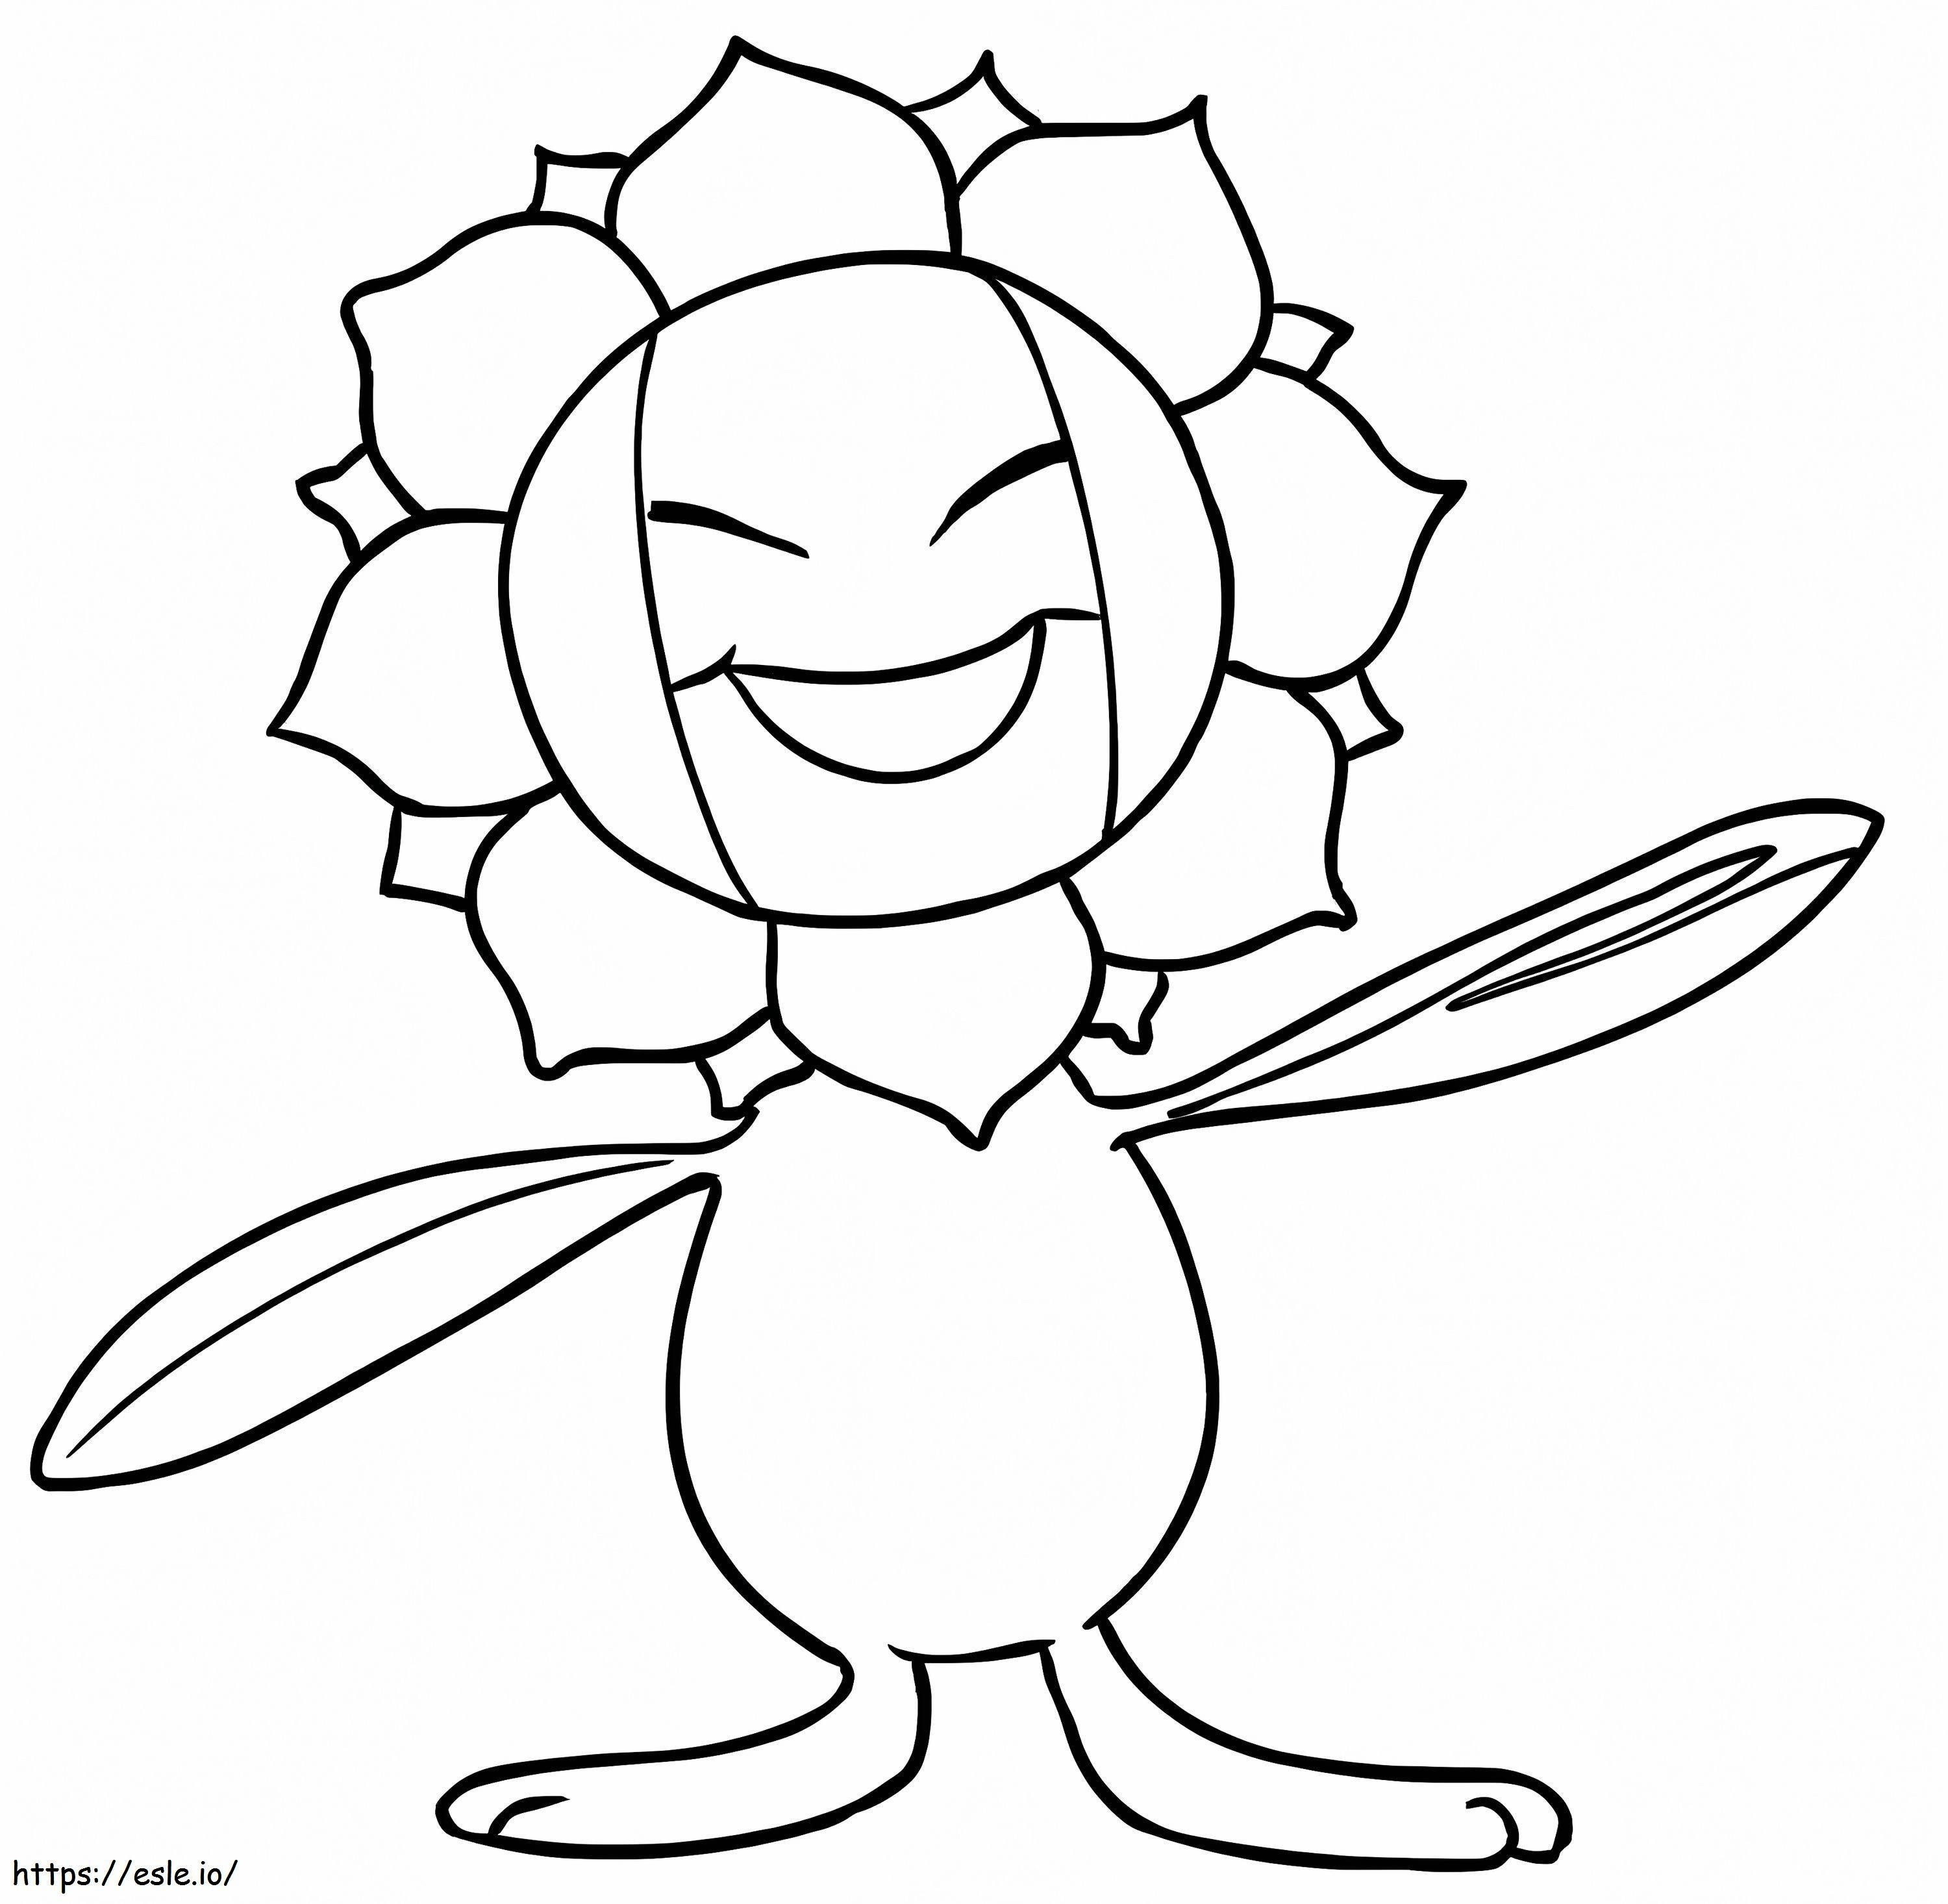 Sunflower In Pokemon coloring page